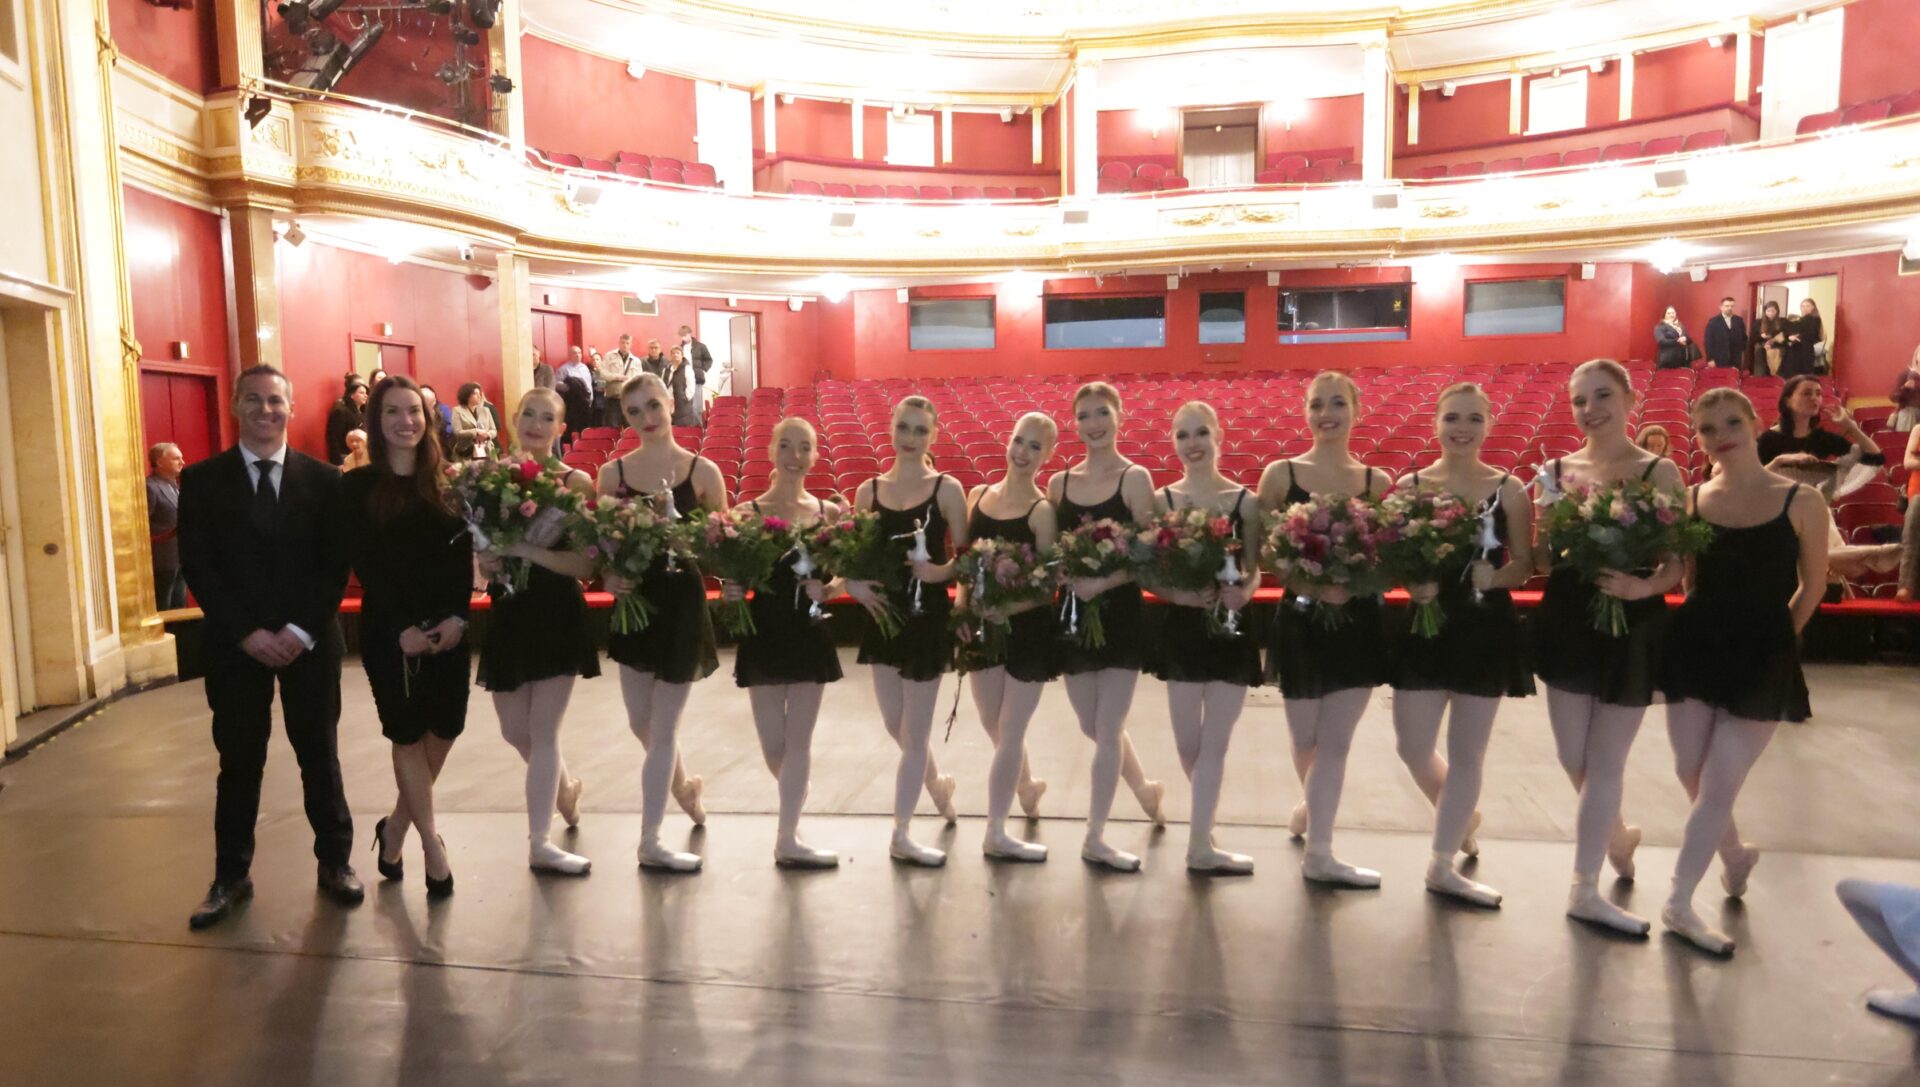 We are delighted to announce that we have become a legal partner of one of the most prestigious ballet schools in Poland. - Ignaszak Law Company